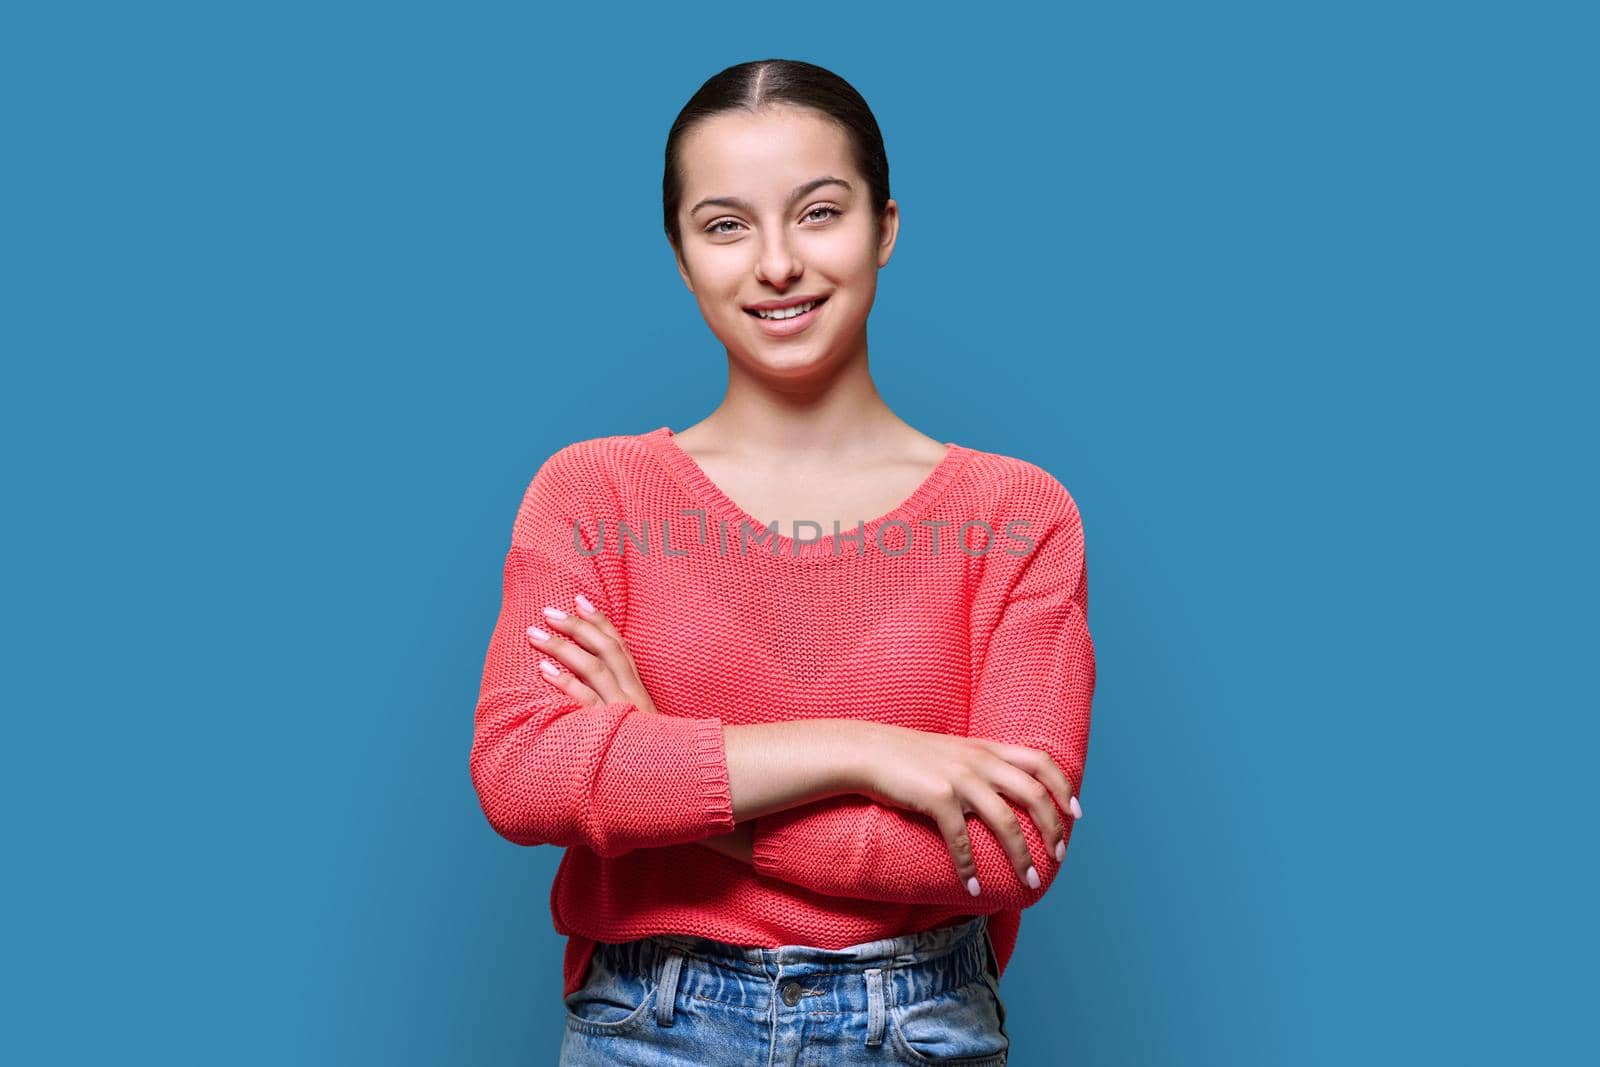 Portrait of teenage smiling female looking at camera on blue color studio background. Confident teen girl with crossed arms in red. Adolescence, high school, youth 15, 16 years old concept